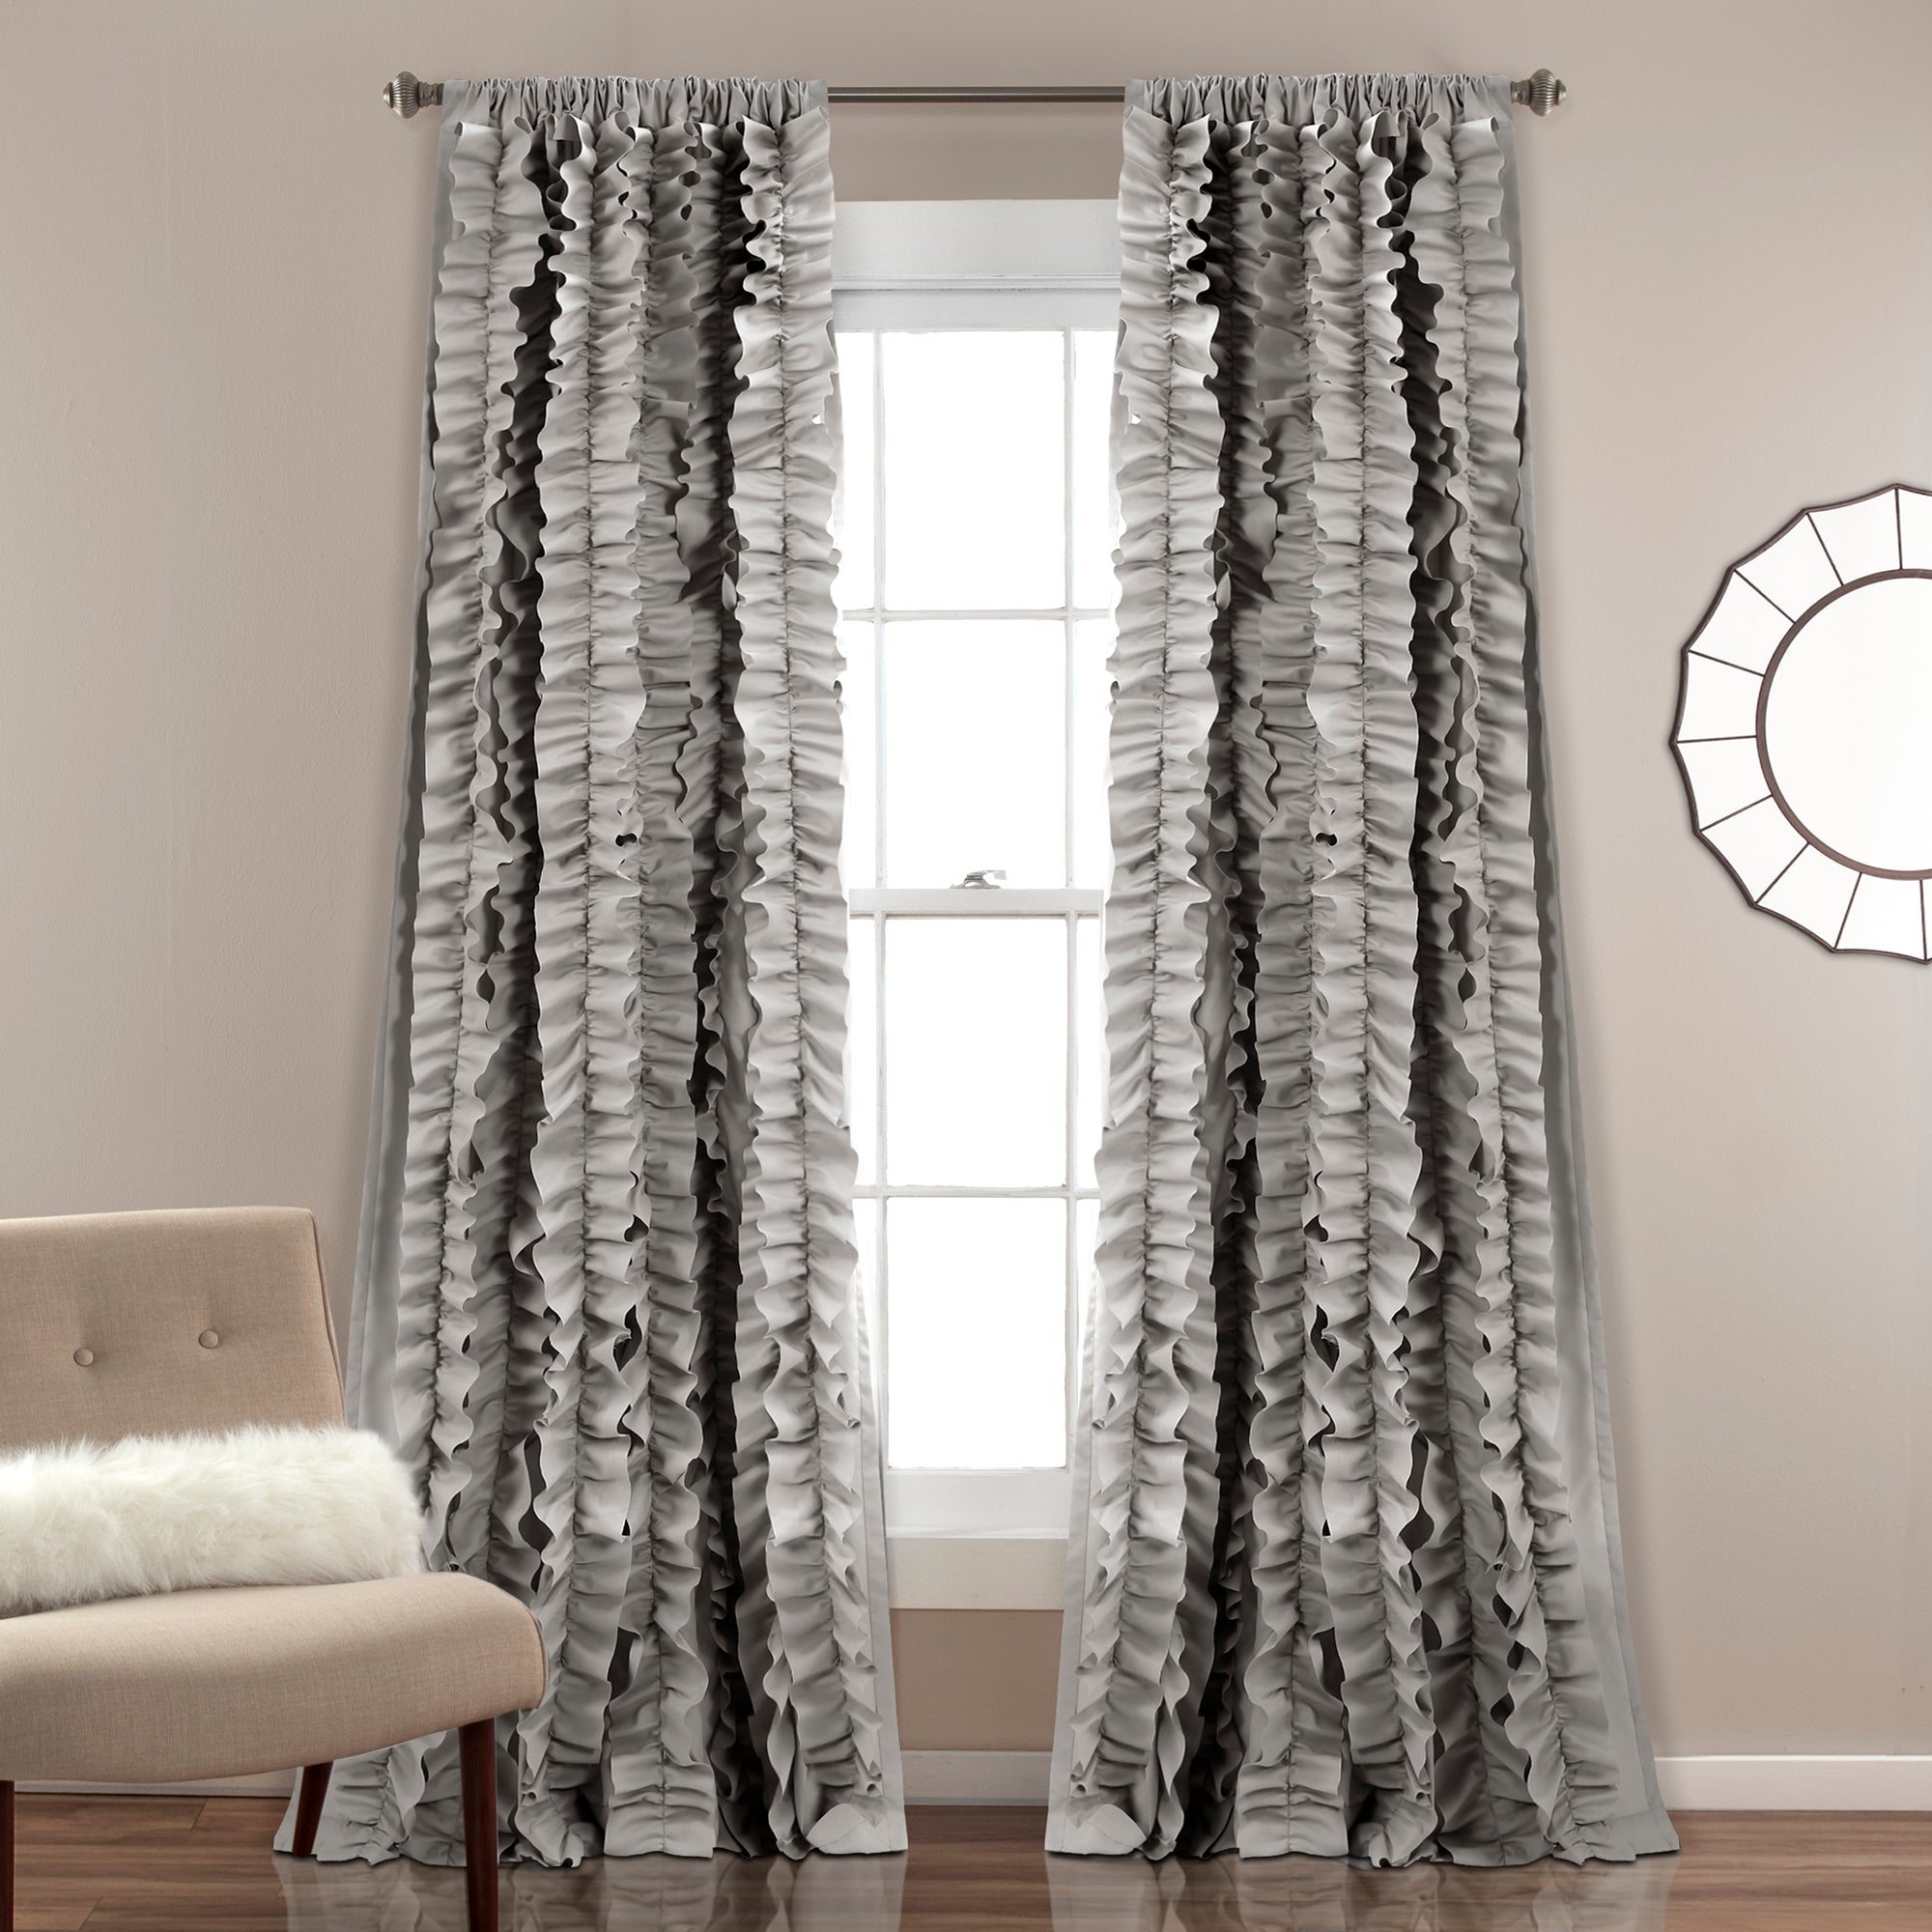 Belle Window Curtains by Lush Decor